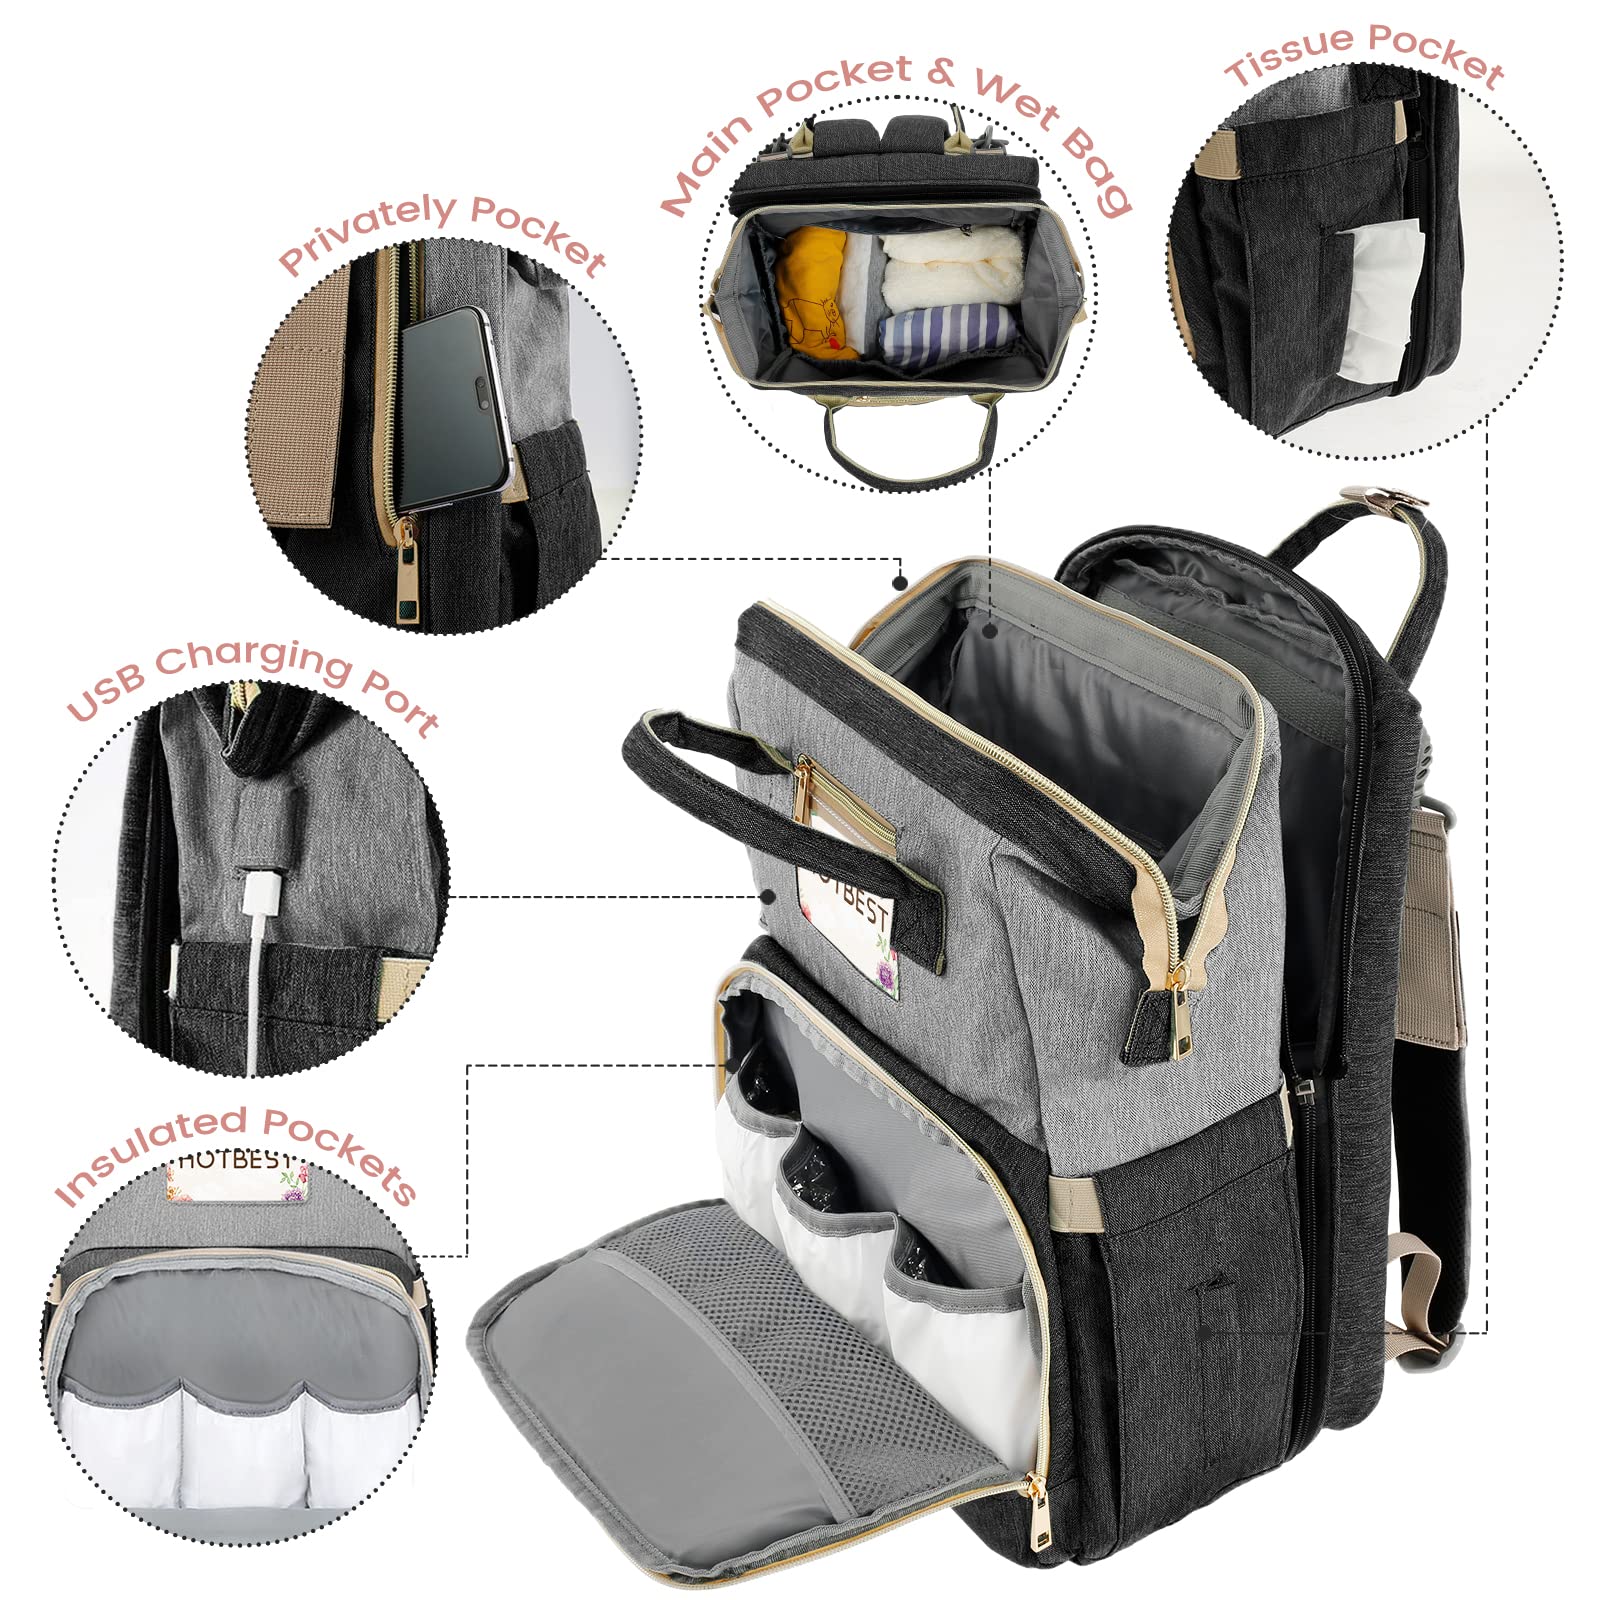 HOTBEST Diaper Bag Backpack, Baby Diaper Bags, Multifunction Waterproof Travel Essentials Baby Bag with USB port, Nappy Changing Bags with Changing Pad,Unisex and Stylish(Black Gray)